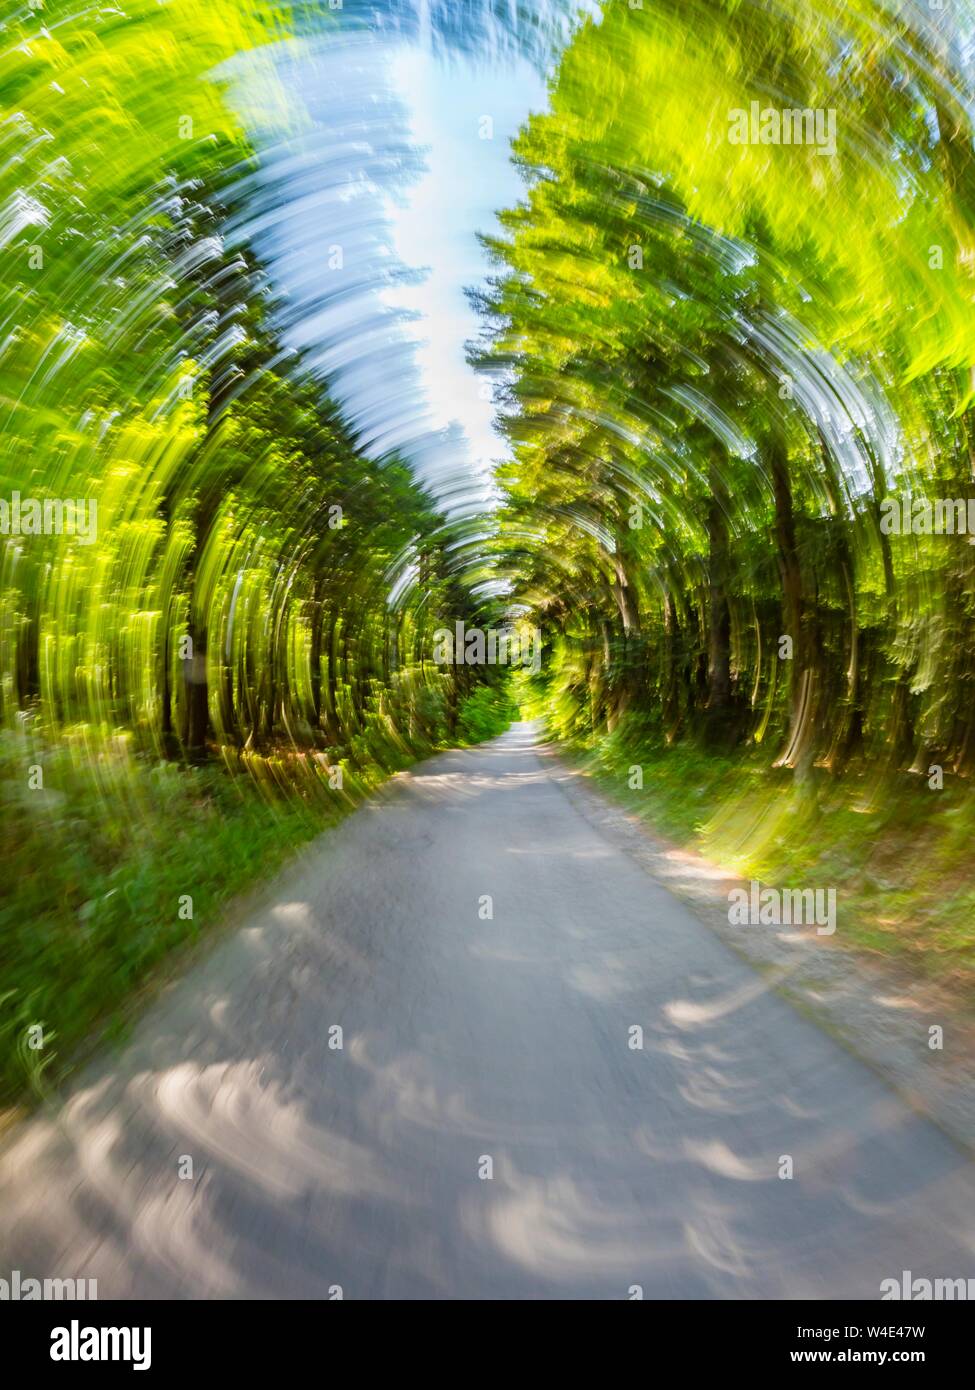 Green forest countryside speeding on road circular twirling dizzy motion Stock Photo